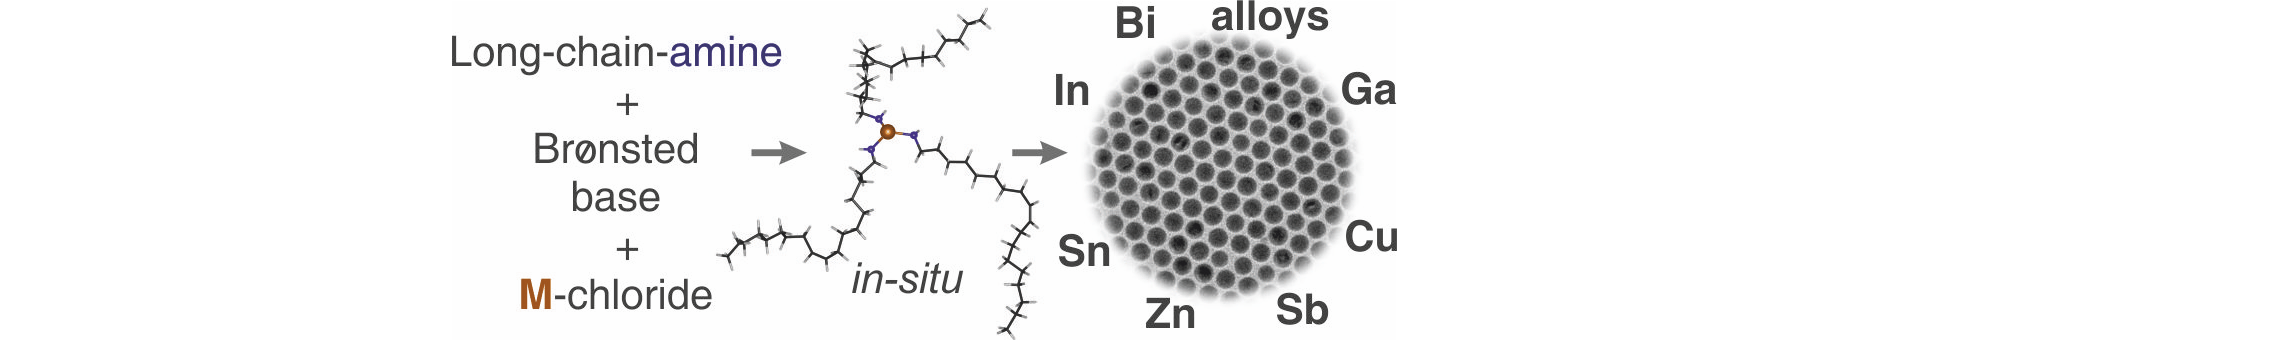 A General Synthesis Strategy for Monodisperse Metallic and Metalloid Nanoparticles (In, Ga, Bi, Sb, Zn, Cu, Sn and Their Alloys) via In-Situ Formed Metal-Long-Chain-Amides